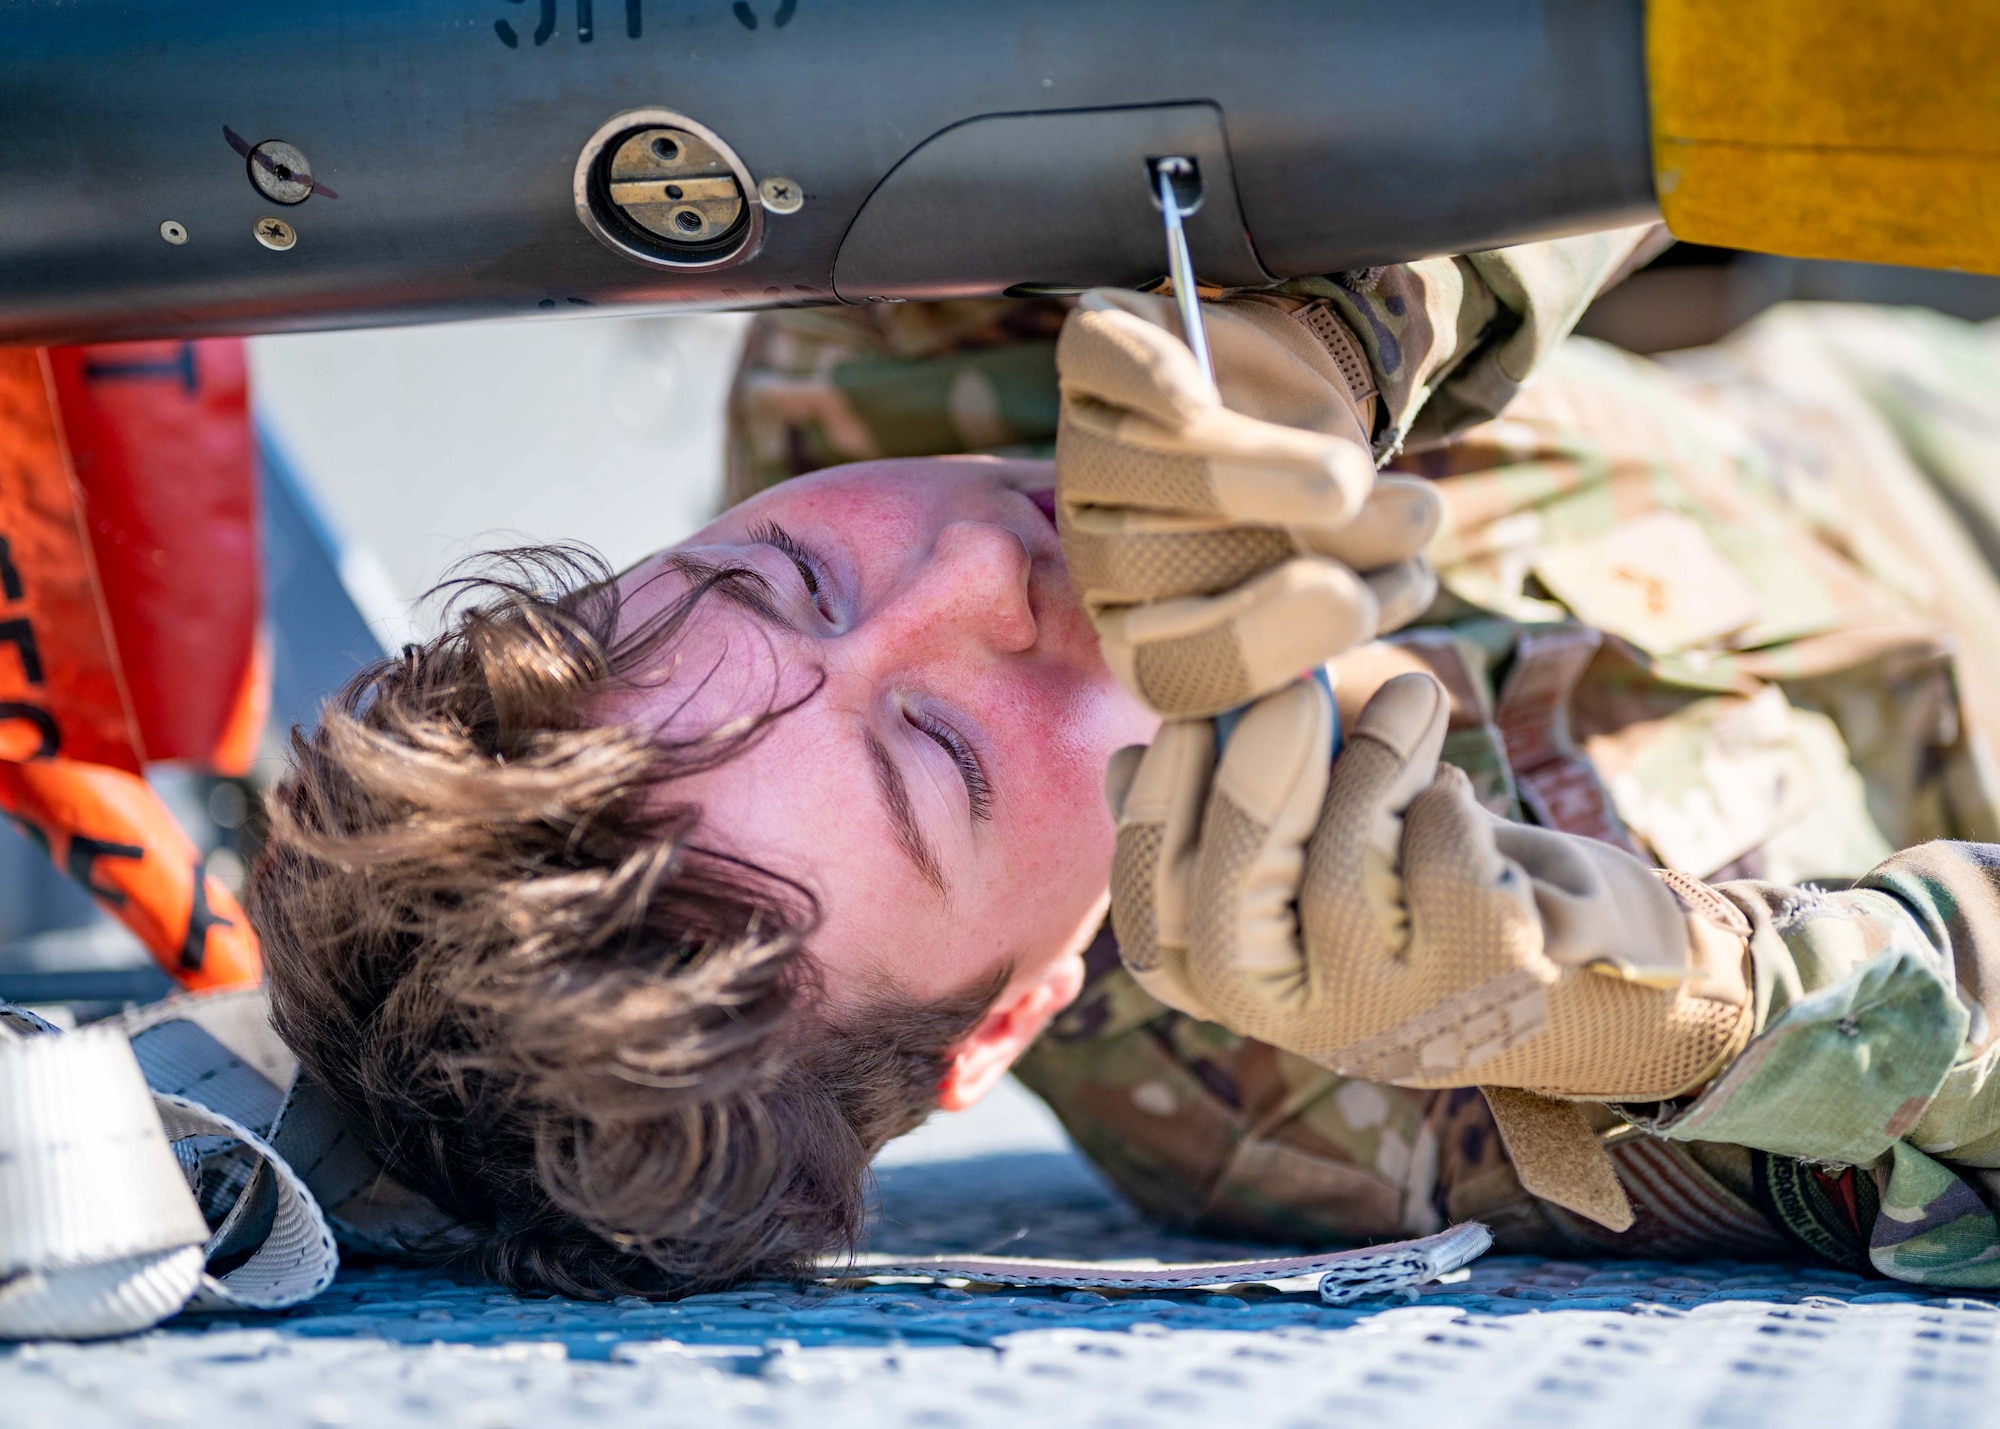 An Airman tightens screws on a missile while loading it onto a transportation unit.